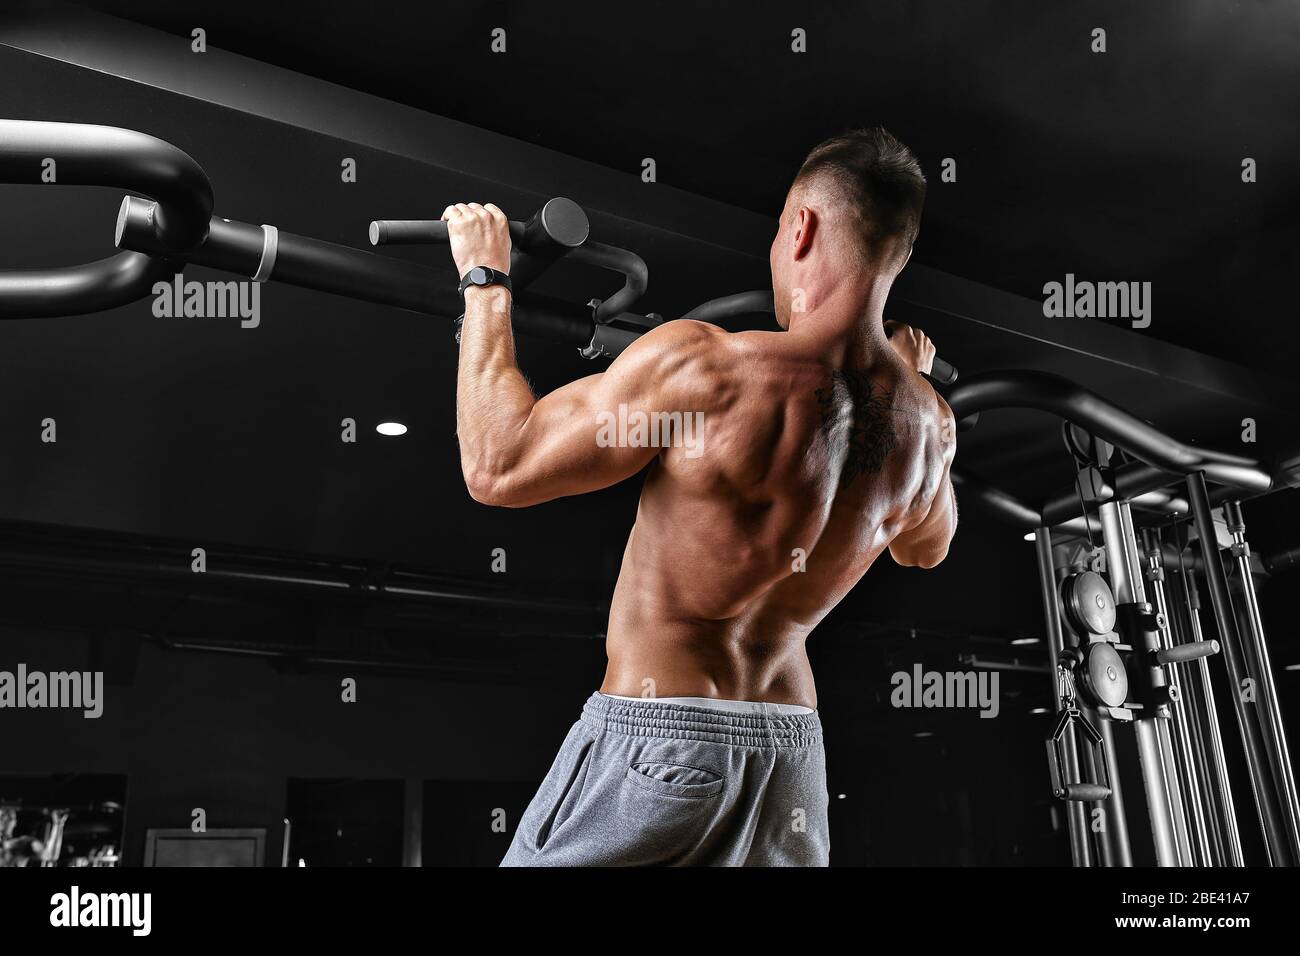 The athlete does a pull-up on the horizontal bar. A man in great